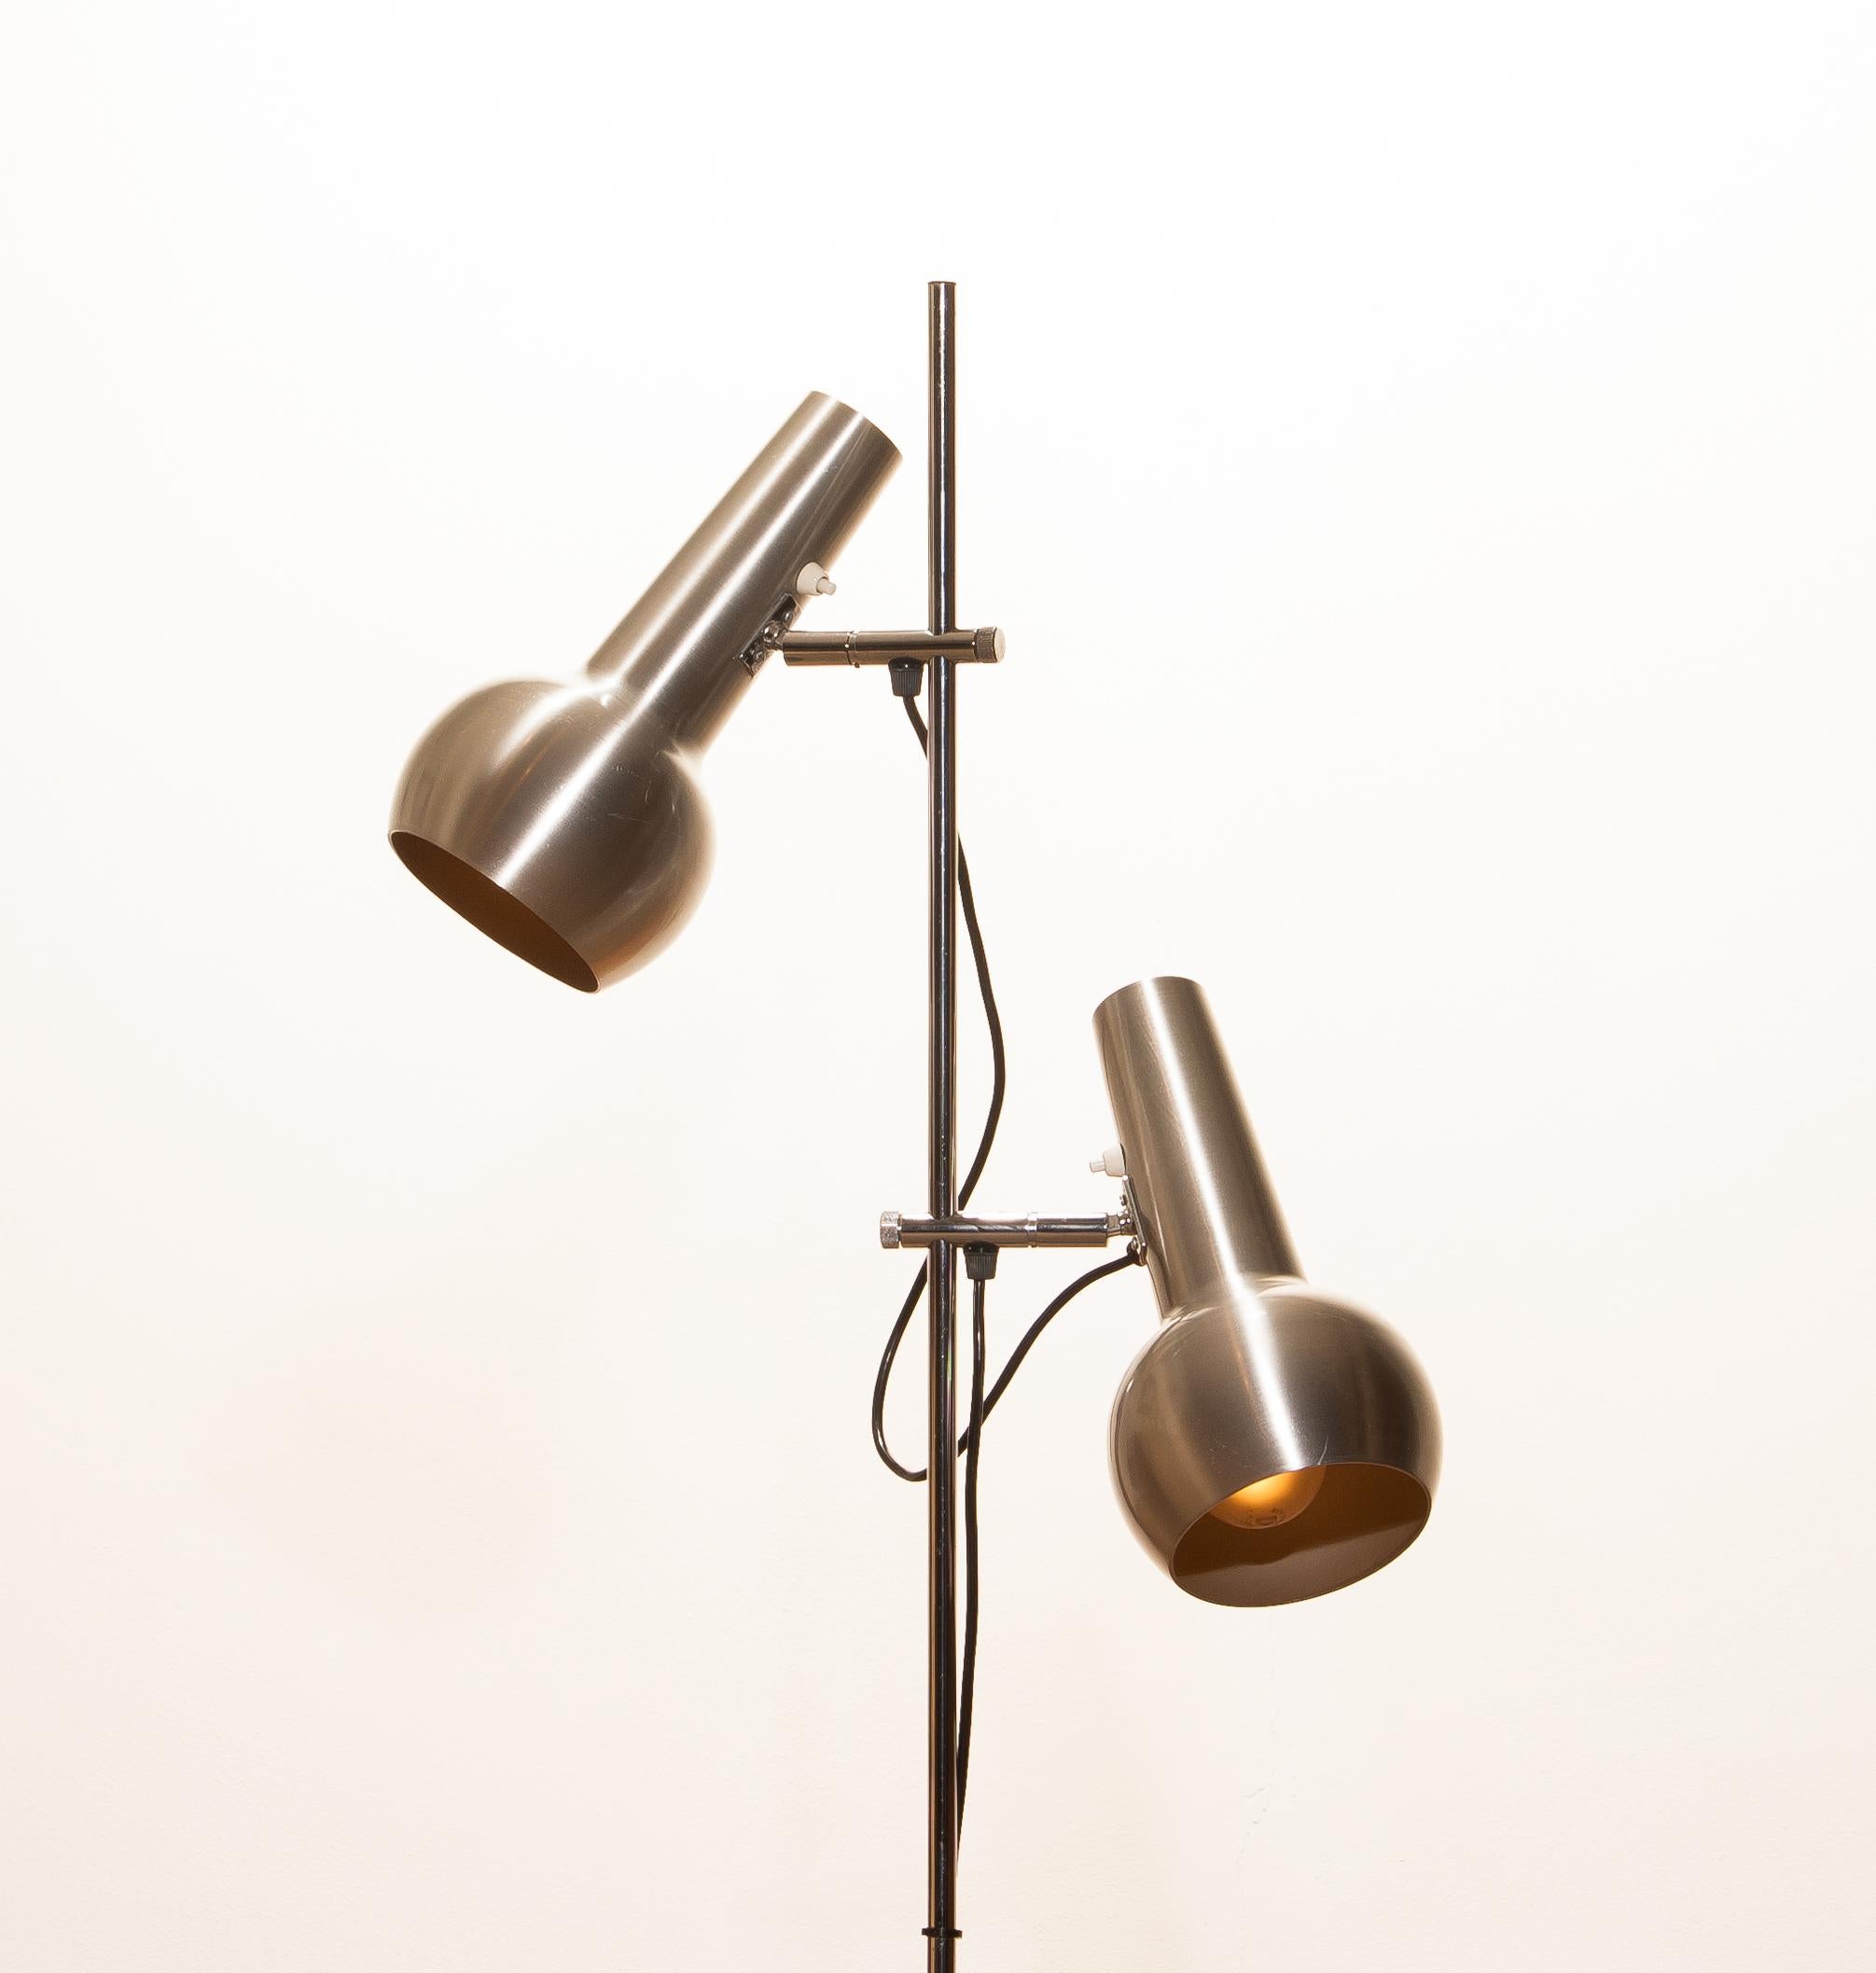 Central American 1970s, Chrome and Aluminium Double Shade Floor Lamp by Koch & Lowy